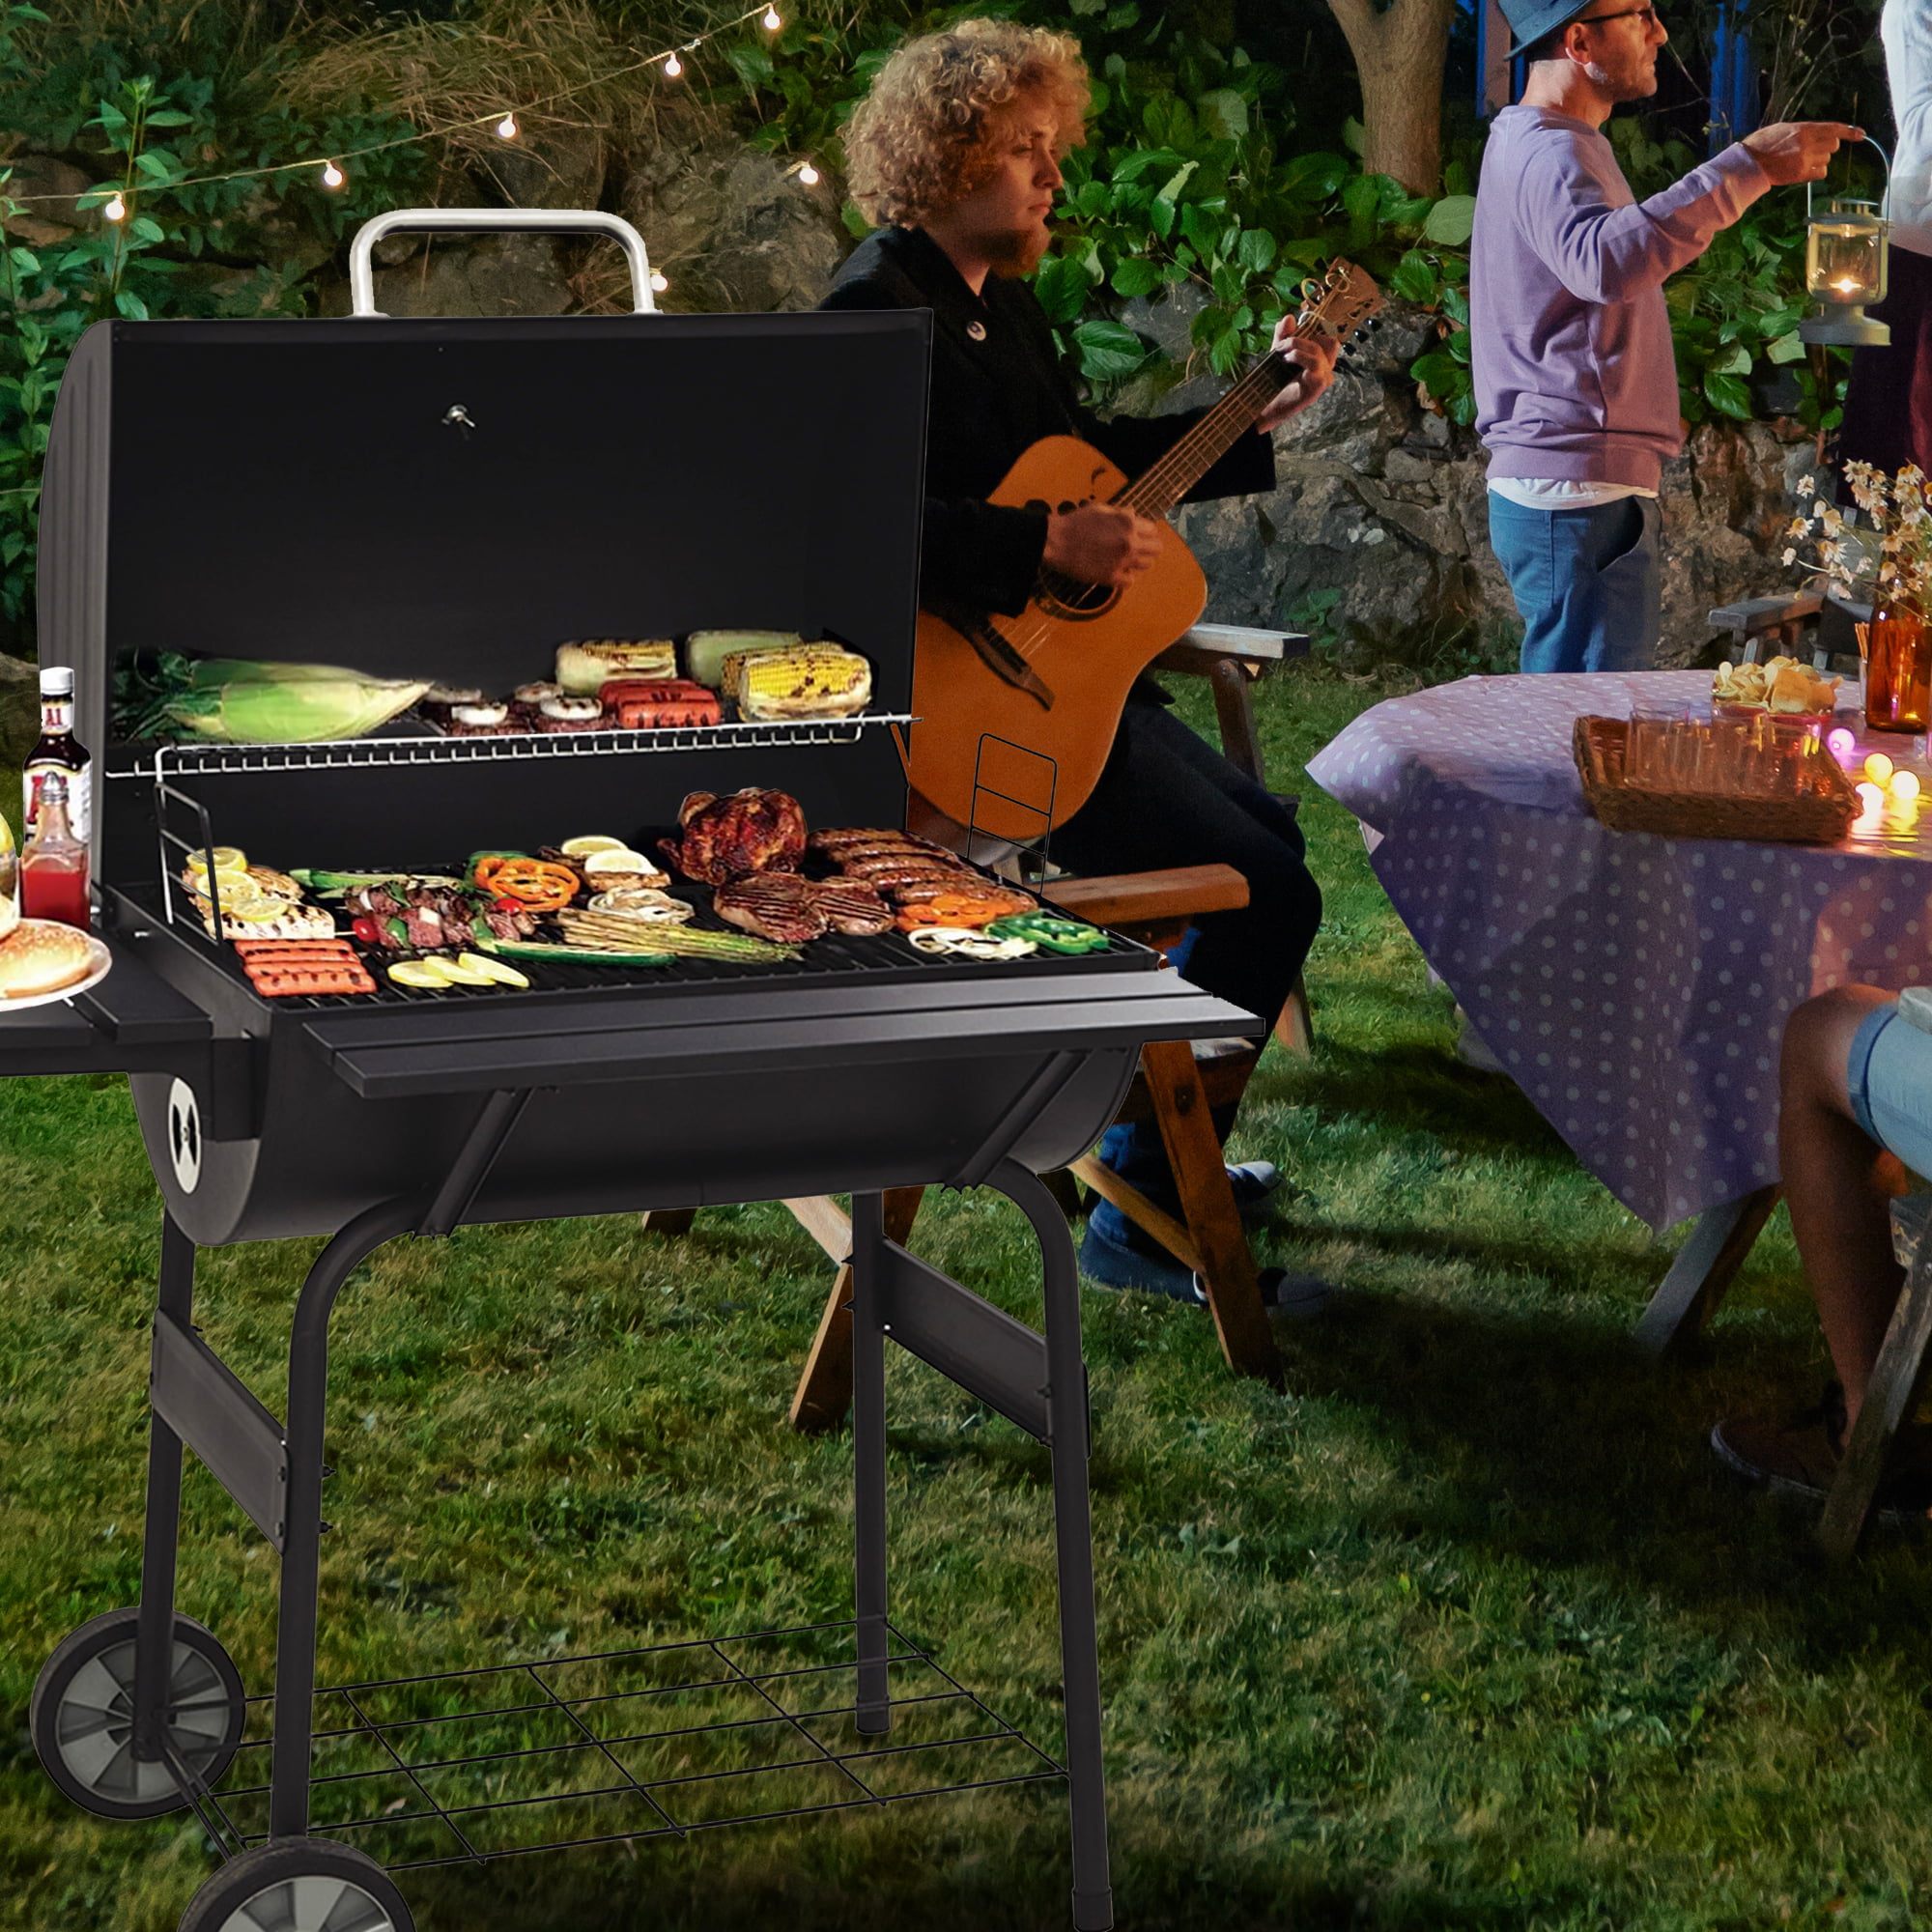 BBQ Barbecue Charcoal Grill w/ Wheels Portable Picnic Party Outdoor Patio Garden 